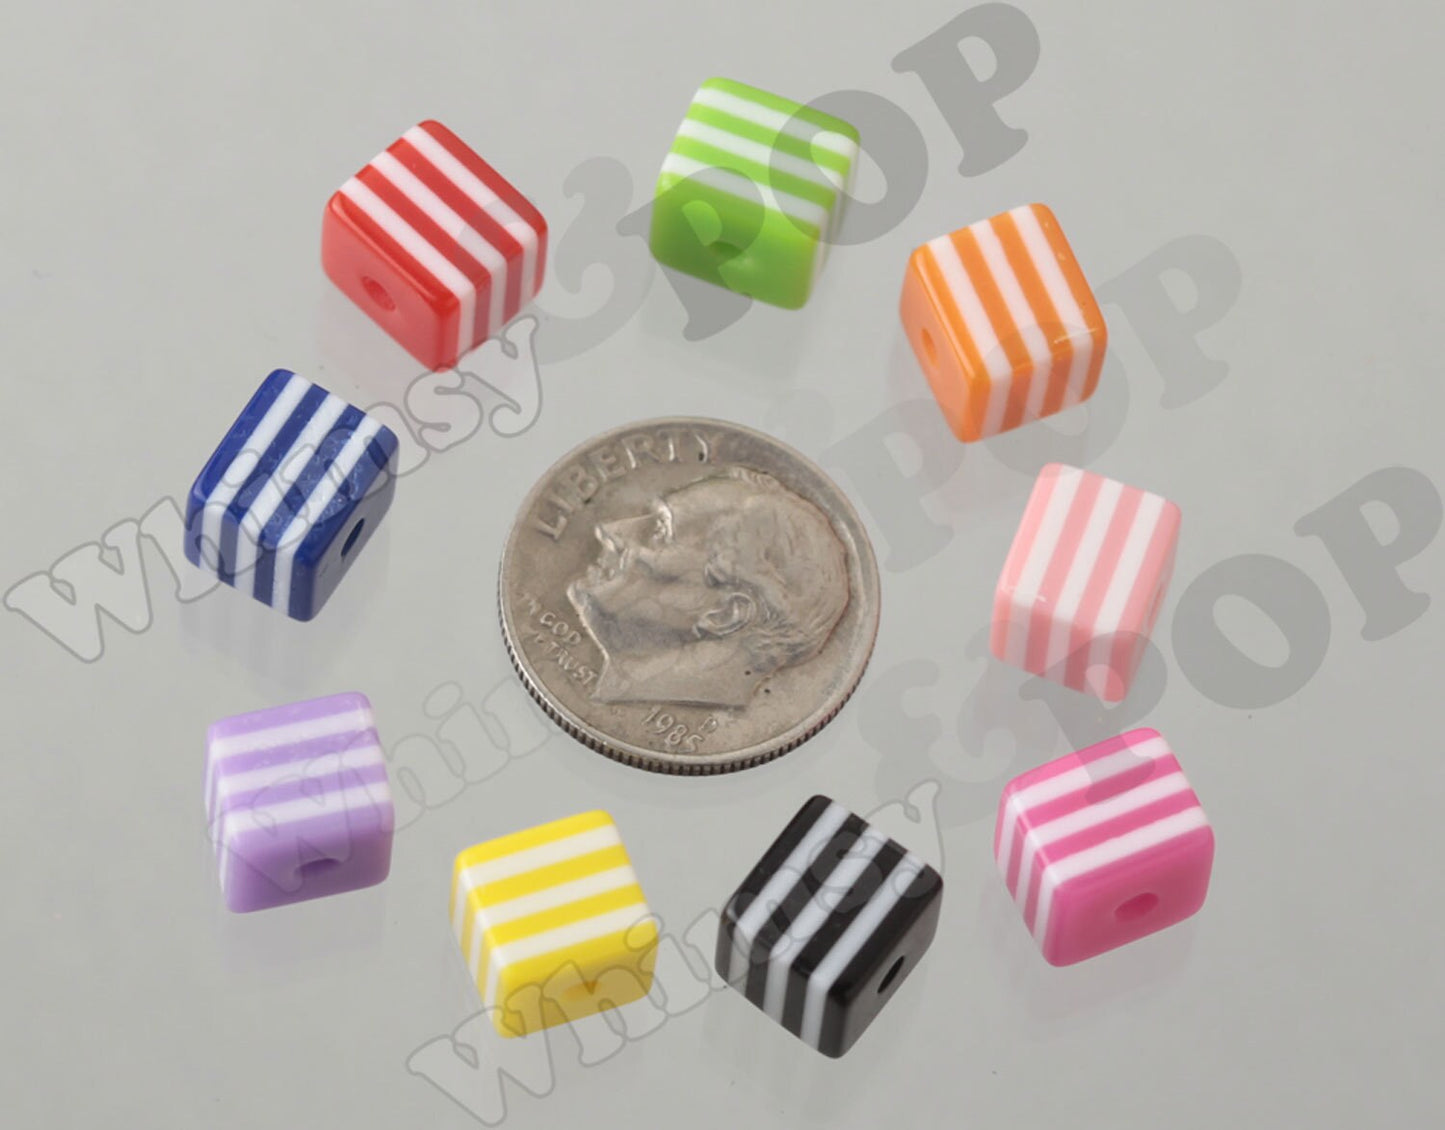 8mm - Striped Cube Beads, Cube Beads, Square Beads, Block Beads, 8mm, 1mm Hole (R9-115-123)